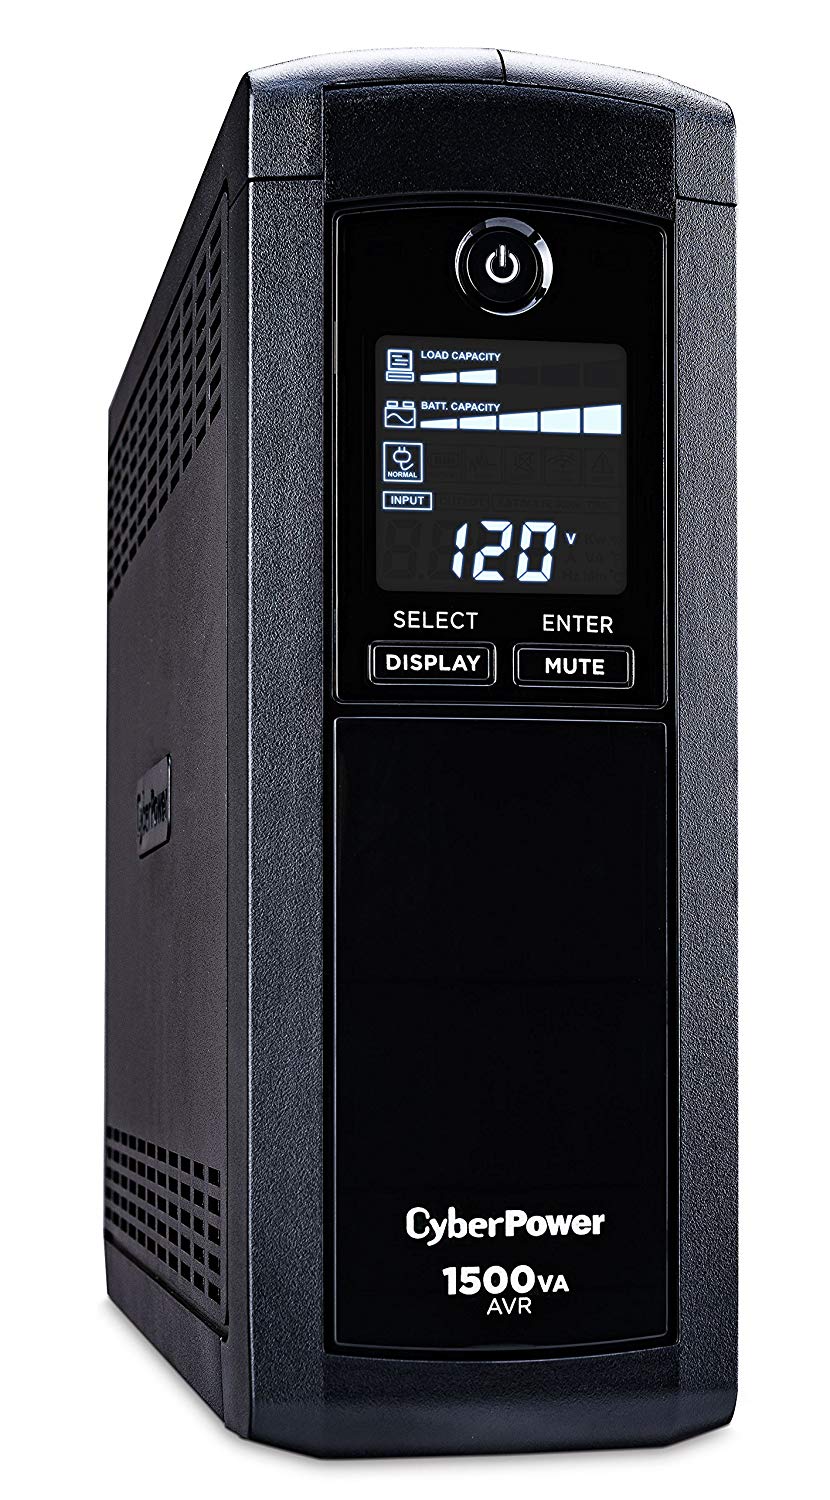 Cyber Power CyberPower  CP1500AVRLCD Intelligent LCD UPS System, 1500VA/900W, 12 Outlets, AVR, Mini-Tower